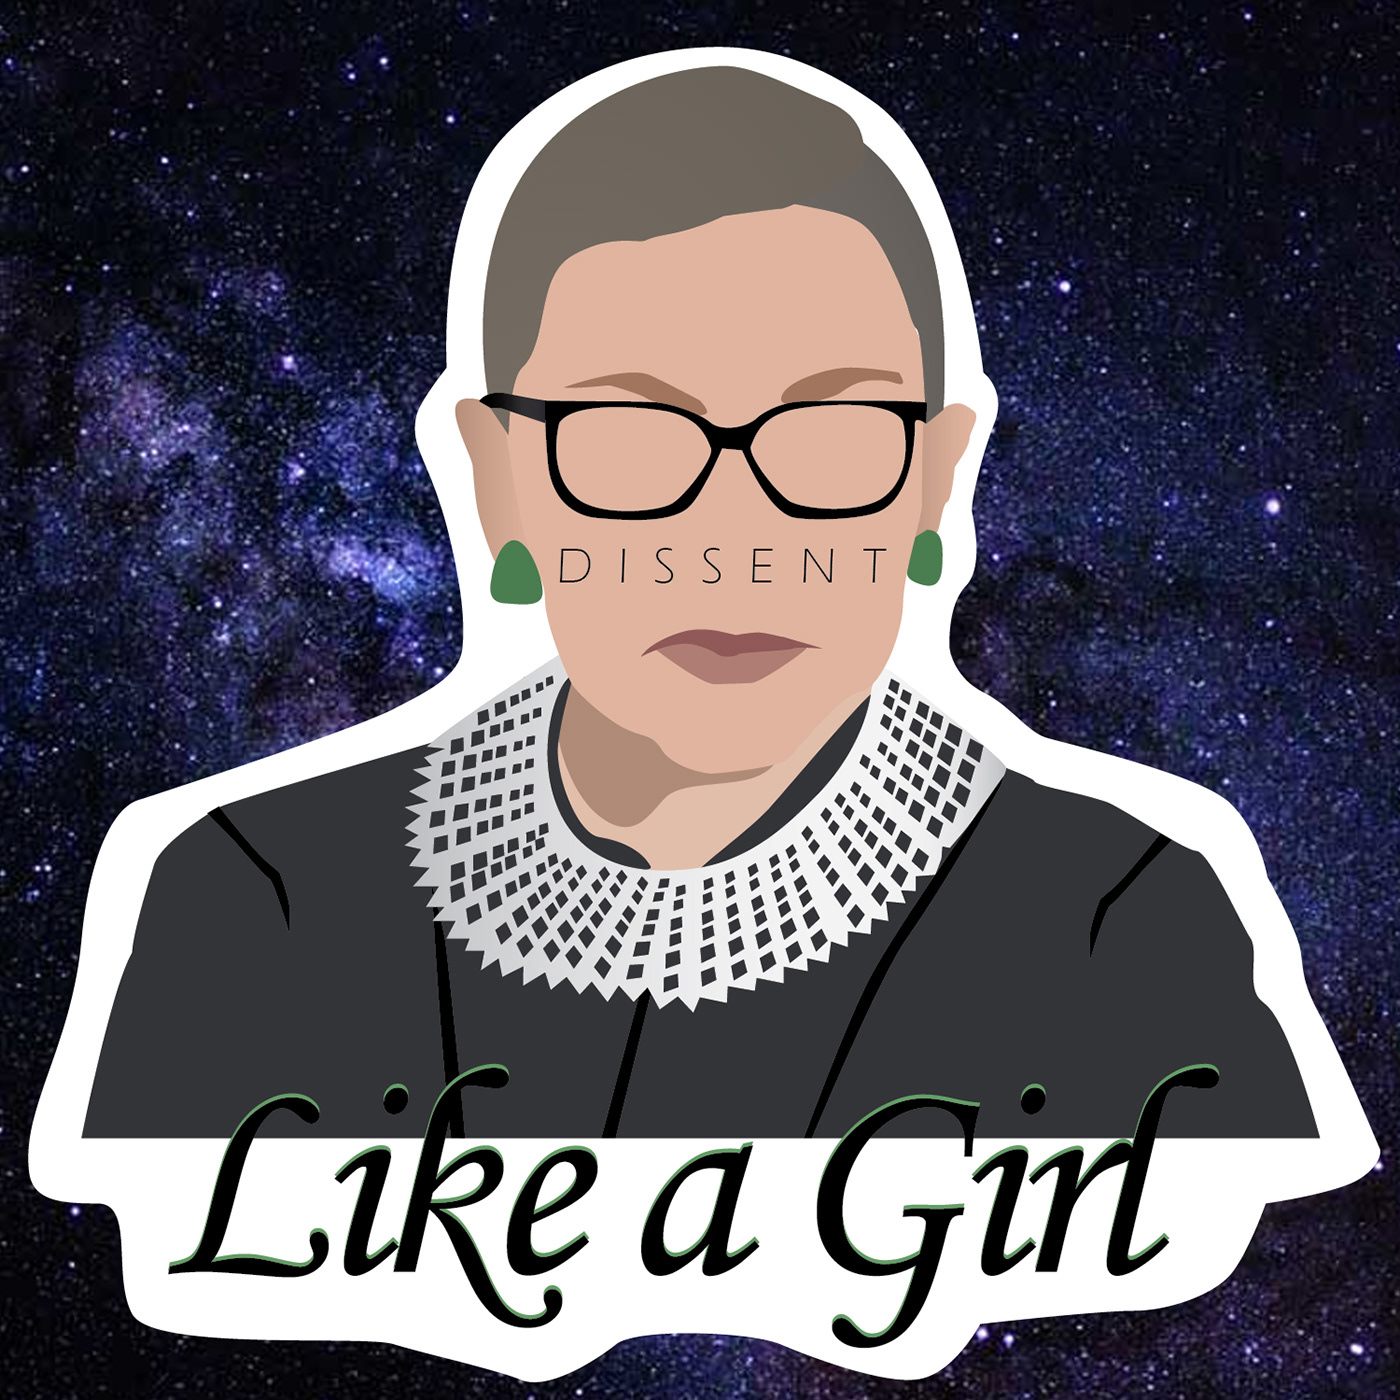 feminist RBG Ruth Bader Ginsburg stickers womens rights